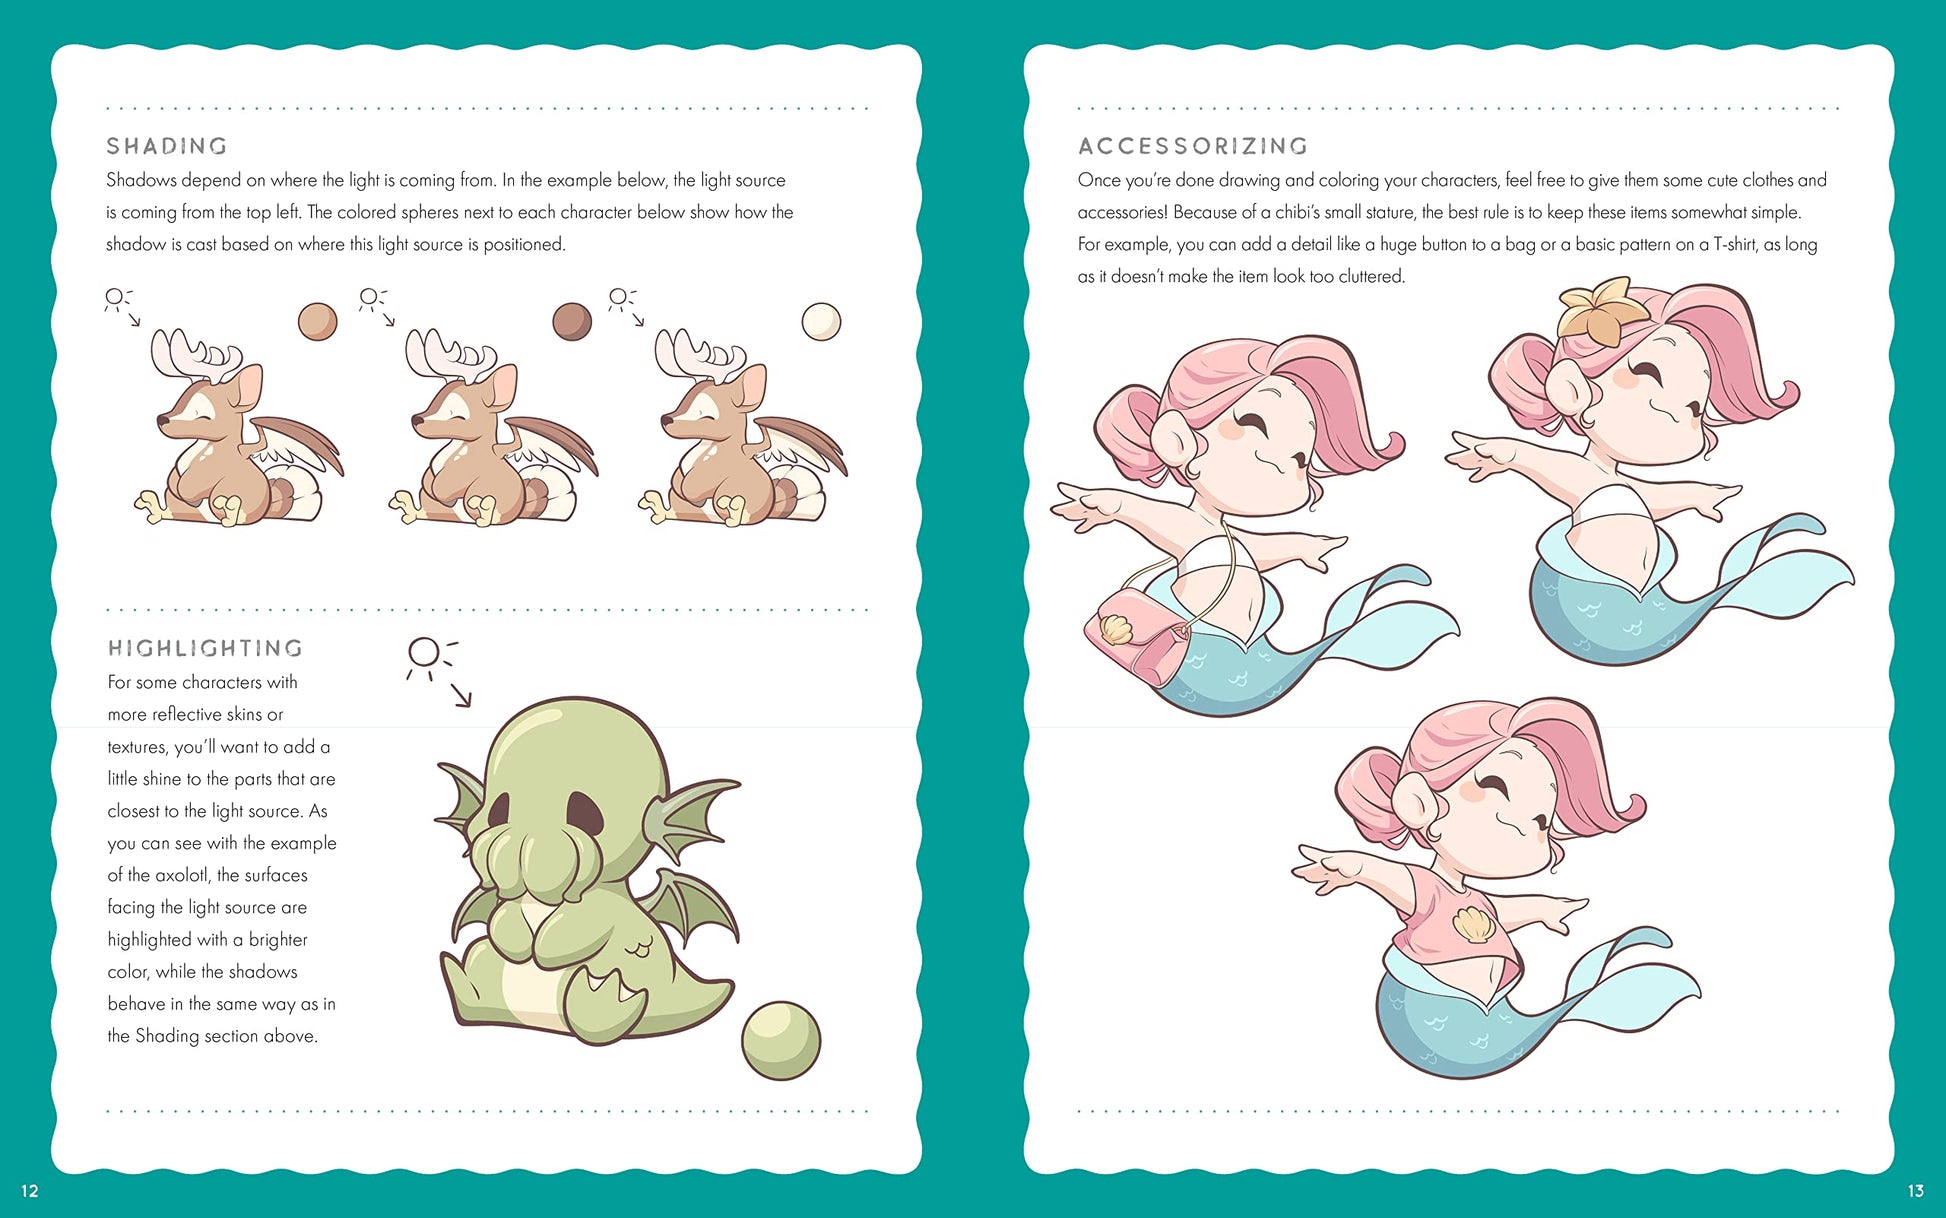 Kawaii stationery drawing challenge - see our drawing results